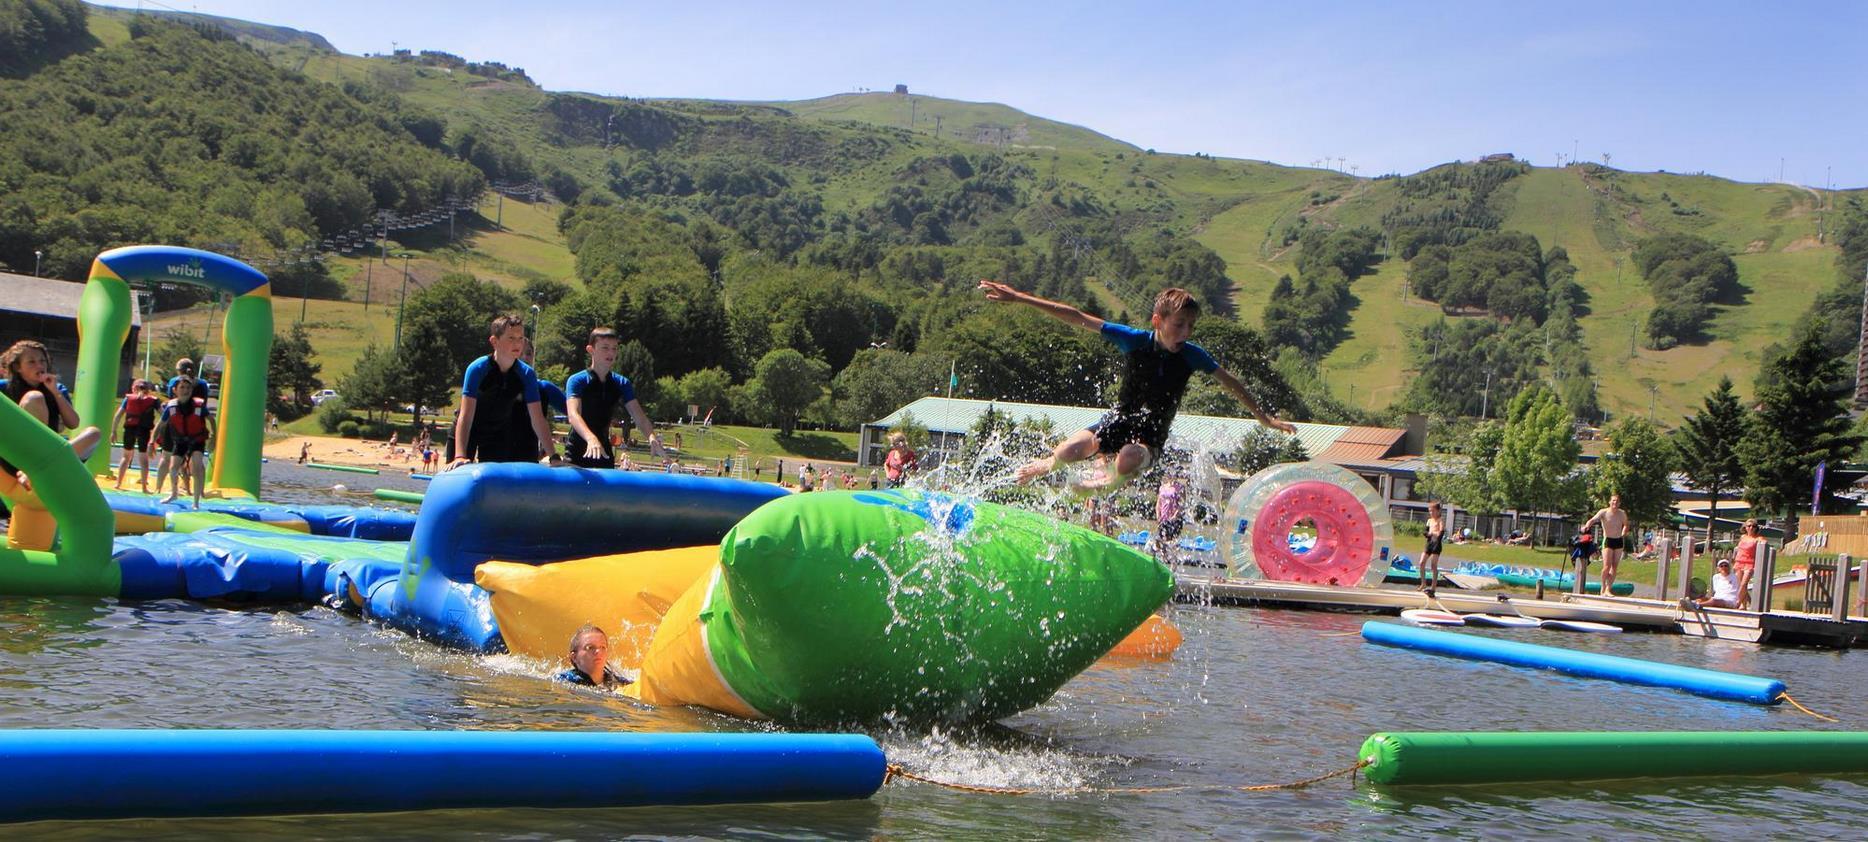 Inflatable games on the Lac des Hermines in Super Besse